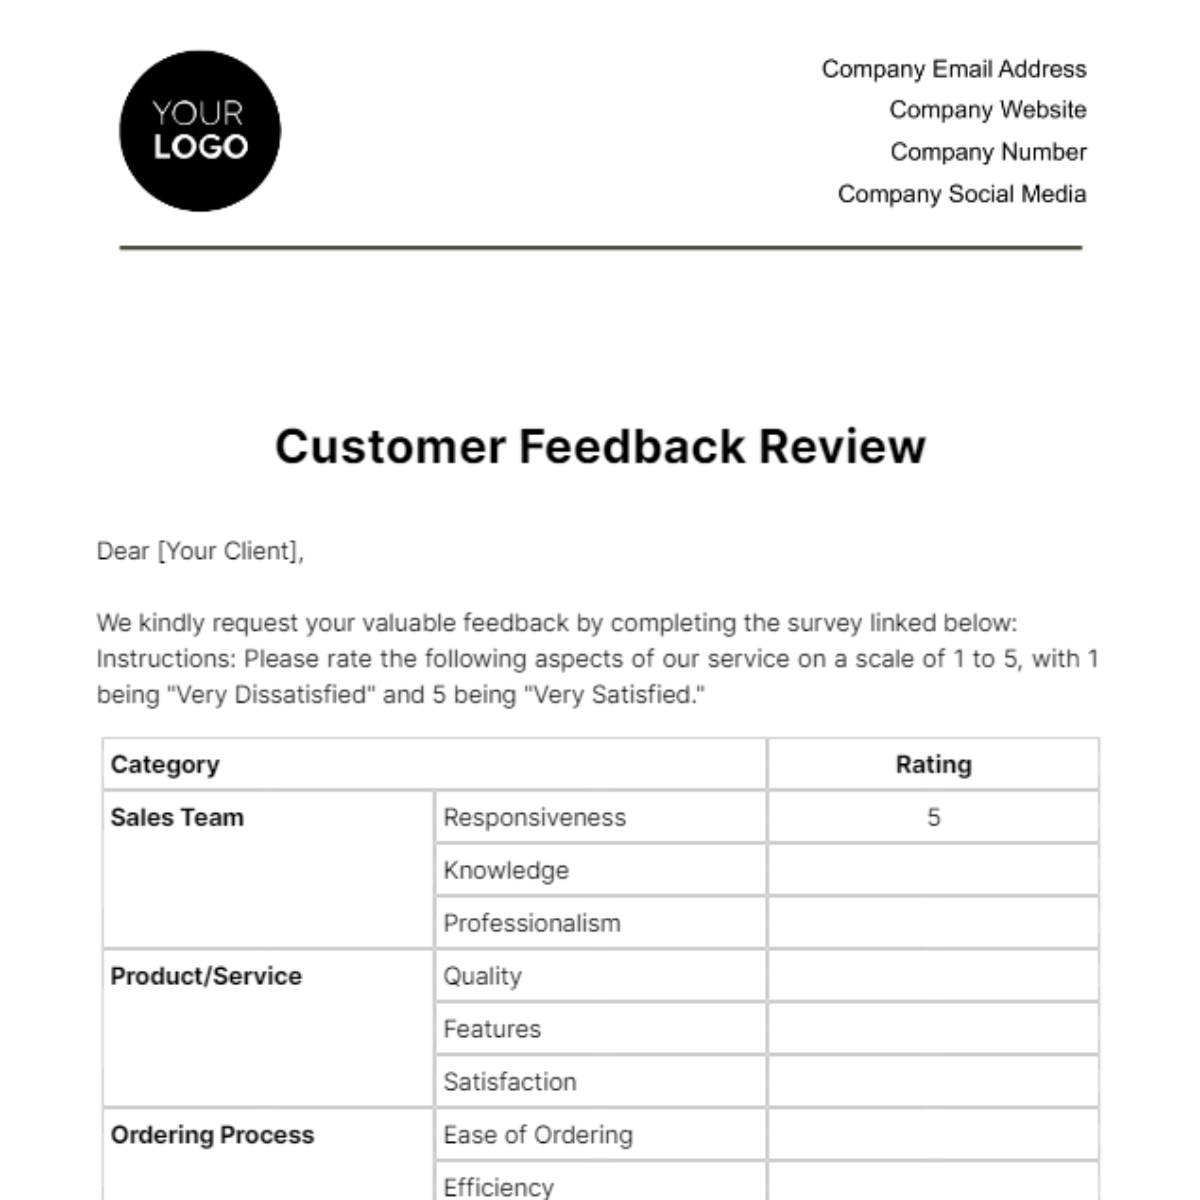 Free Customer Feedback Review Template